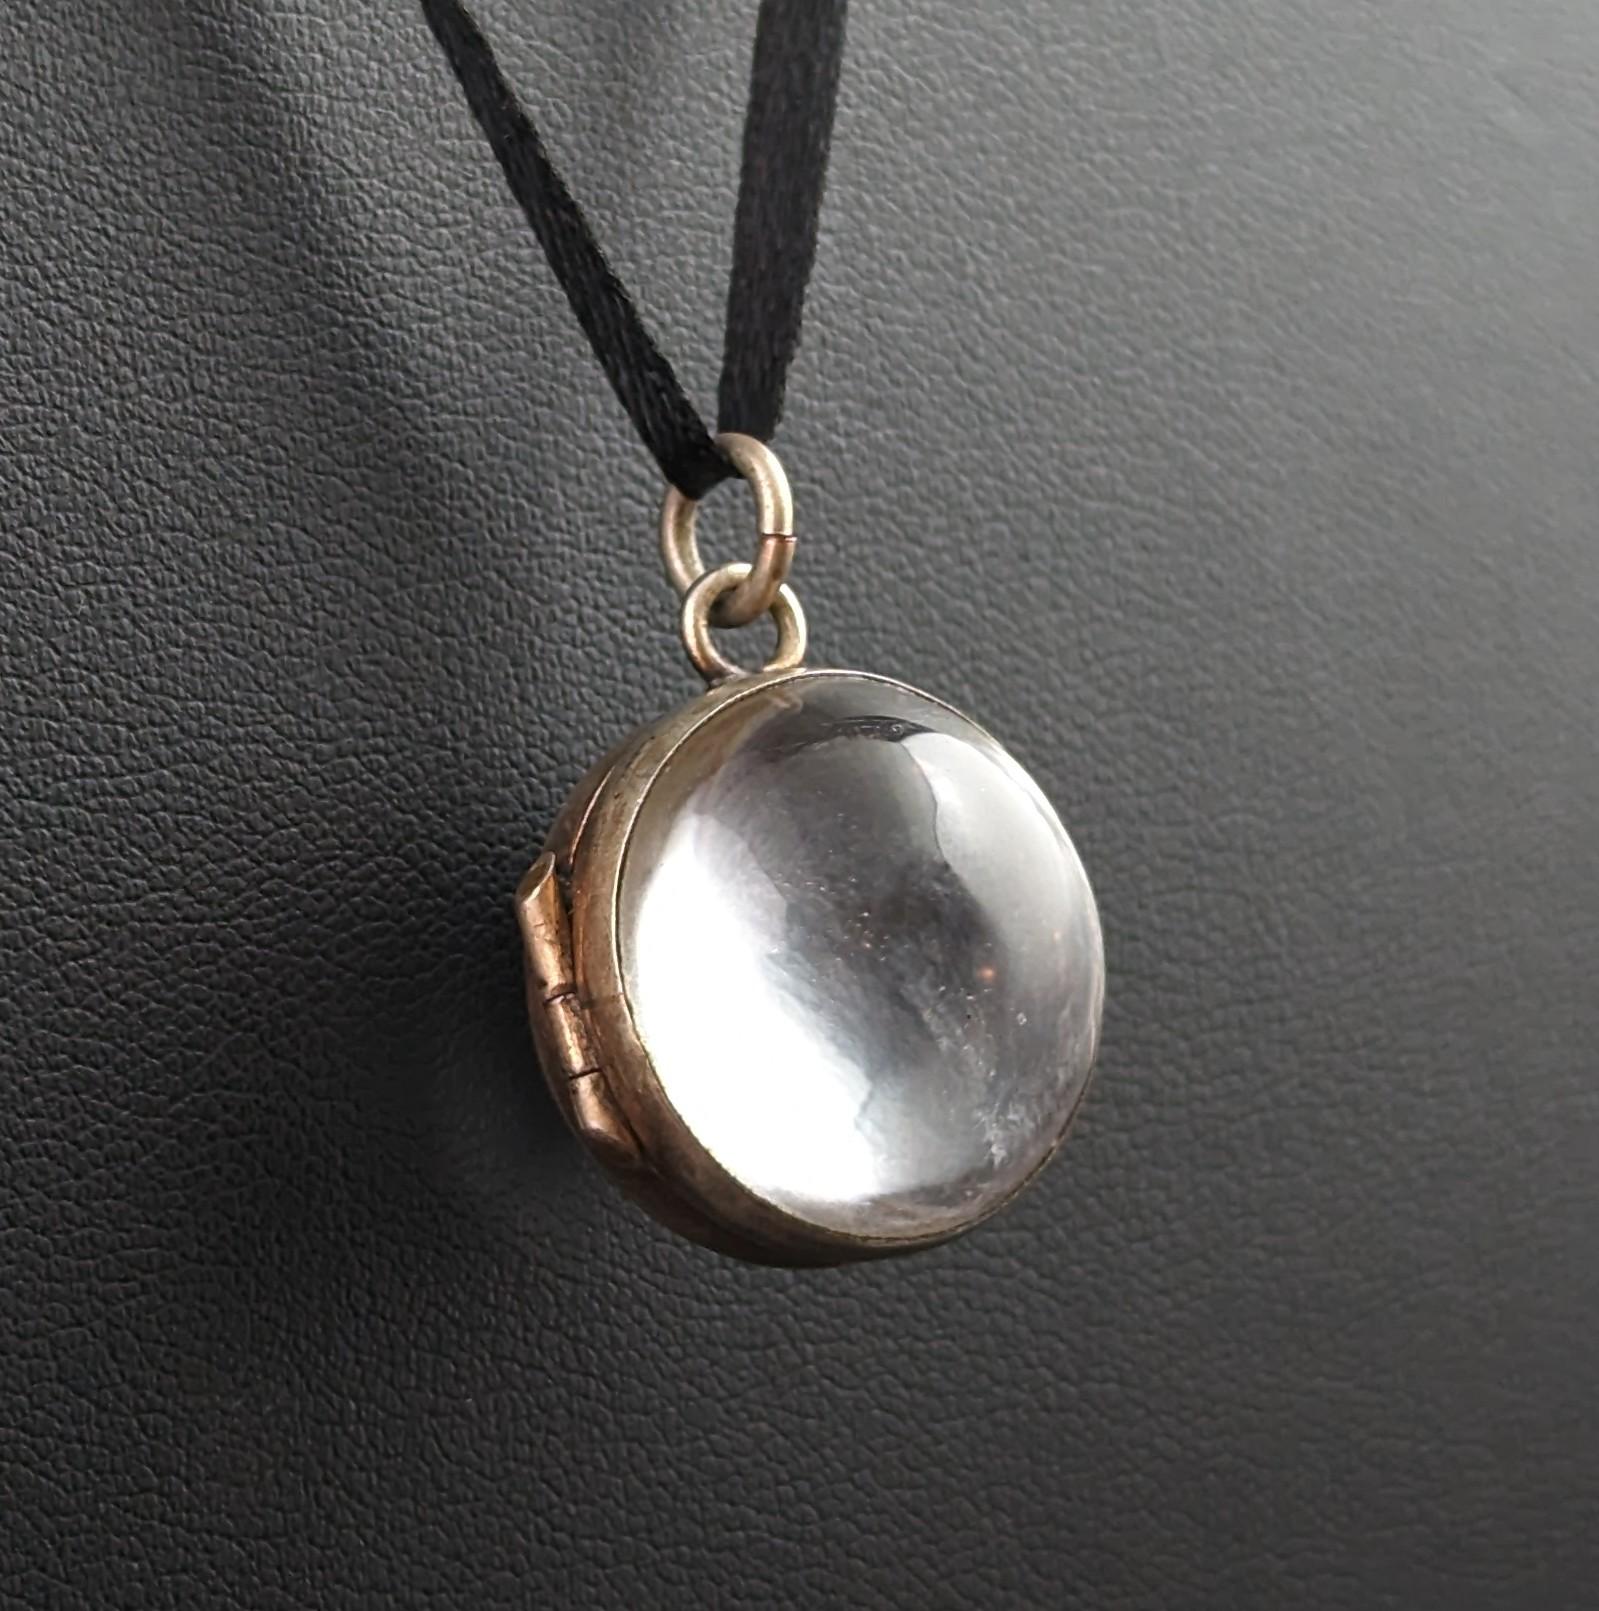 You cannot help but be mesmerised by this stunning antique, pools of light rock crystal locket pendant.

Beautiful high polished smooth rock crystal cabochons each set into a gilt silver frame, the spherical shape enhancing the enchanting glow from